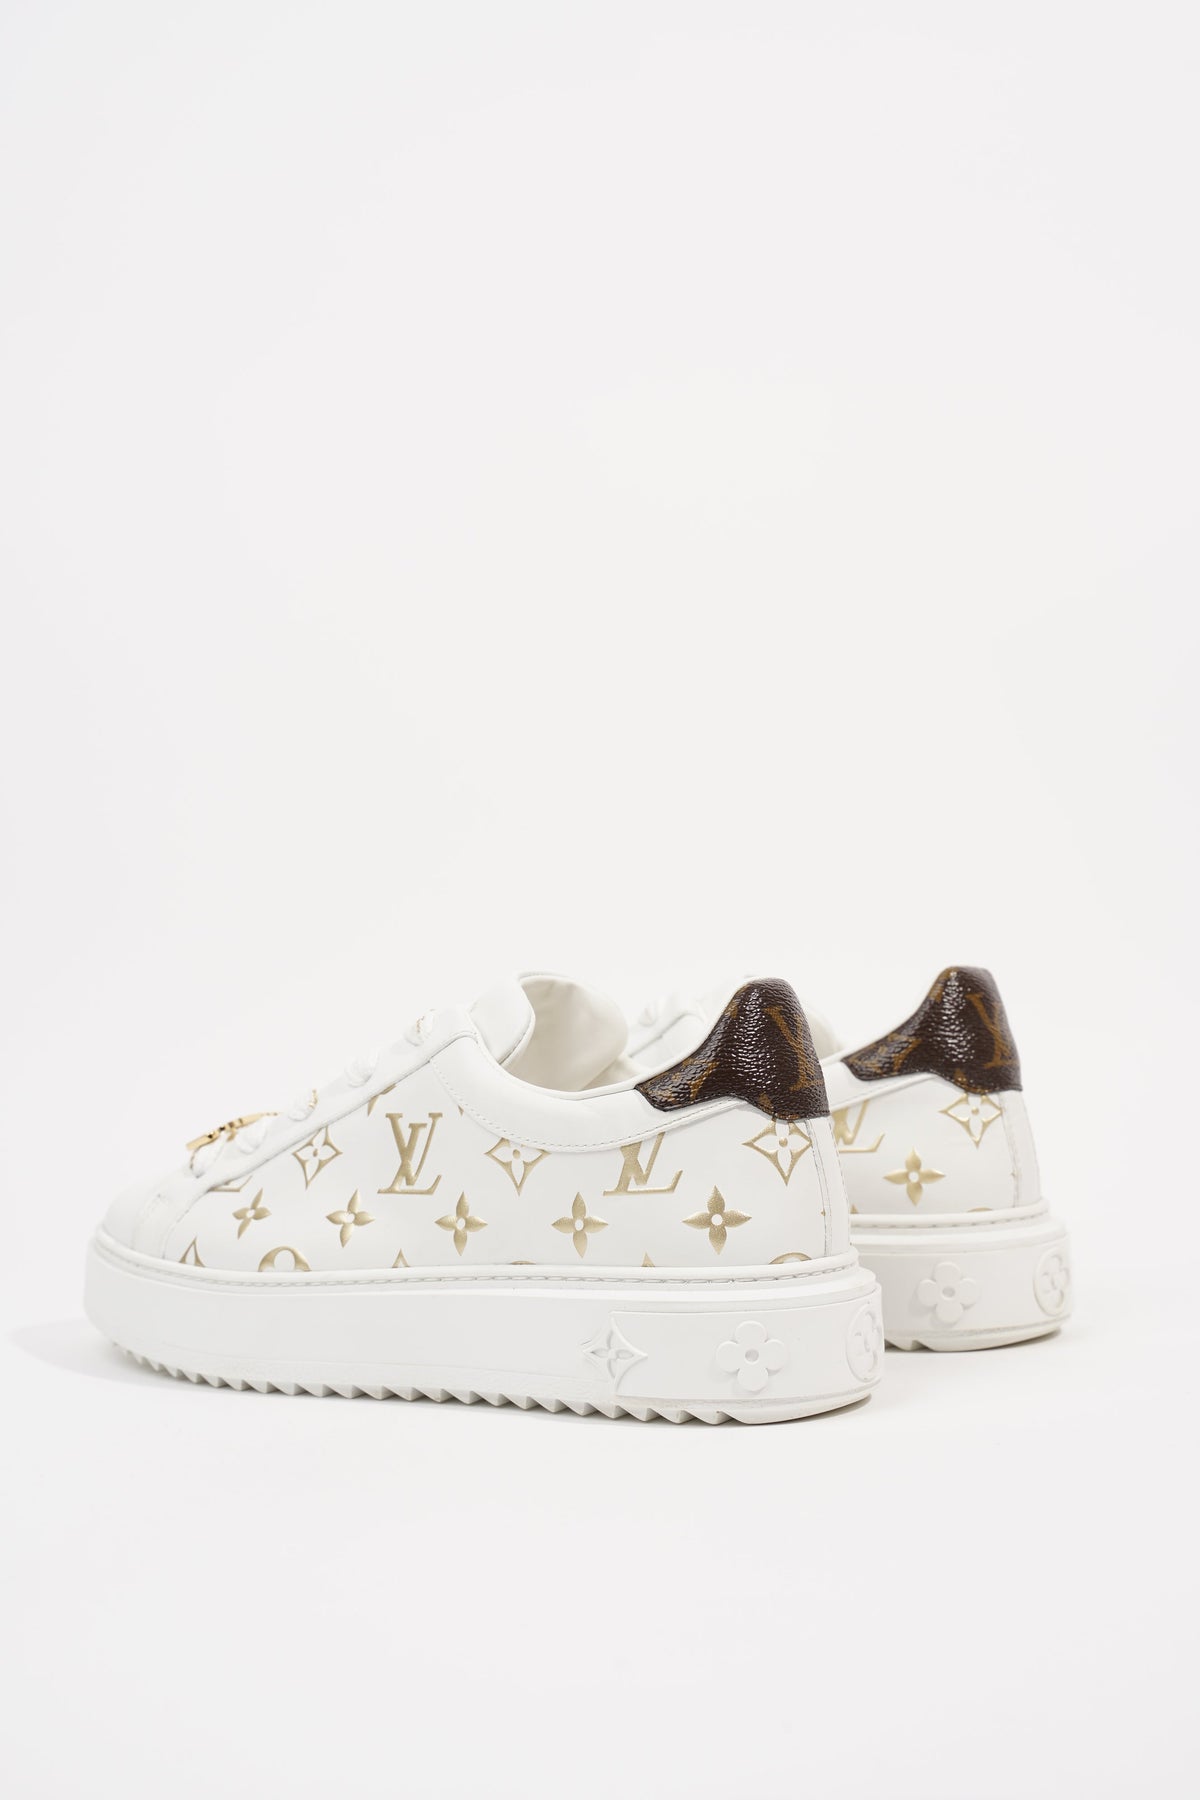 Louis Vuitton White & Gold Transparent Time-Out Womens Sneaker